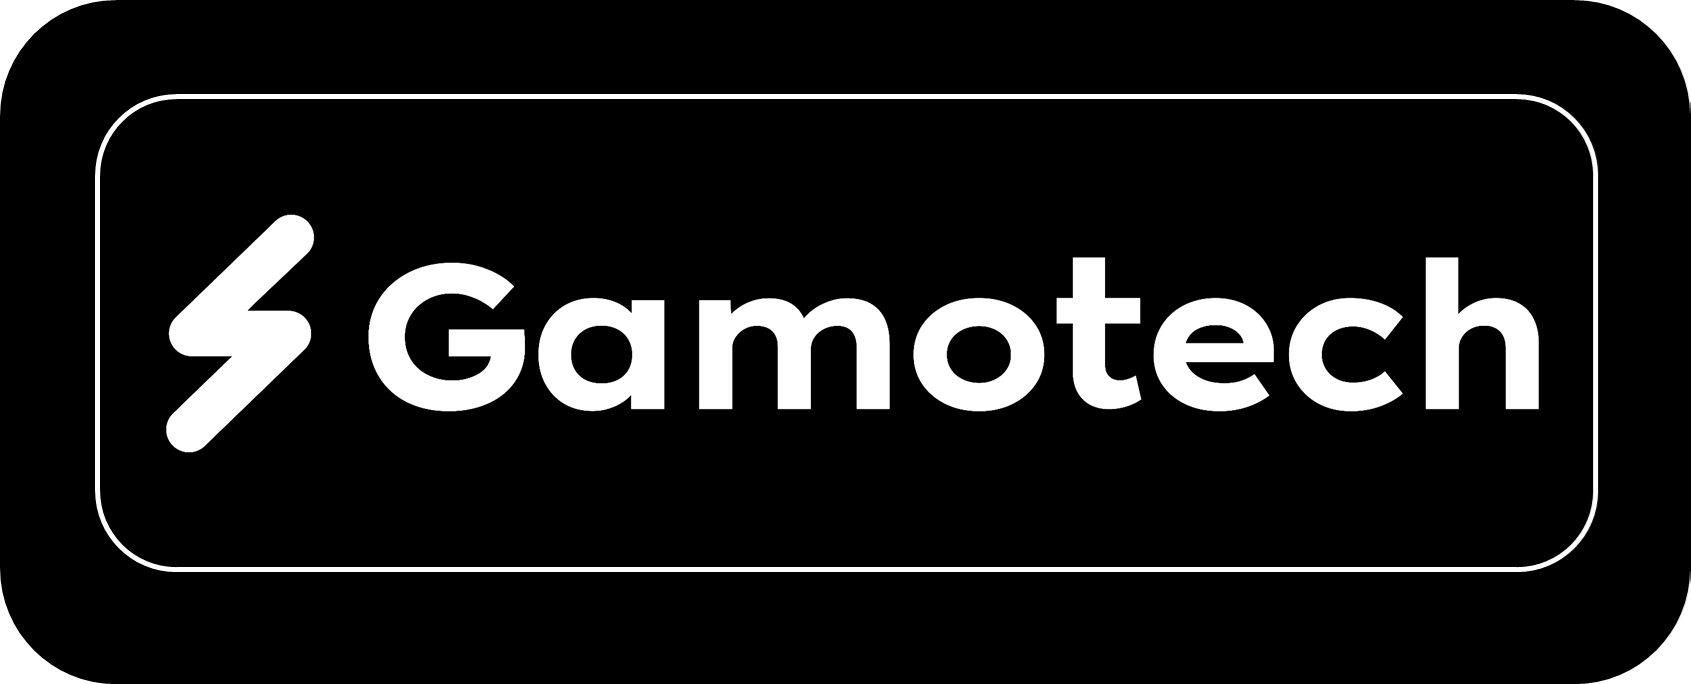 Gamox can be standalone and mounted on the back of a pickup